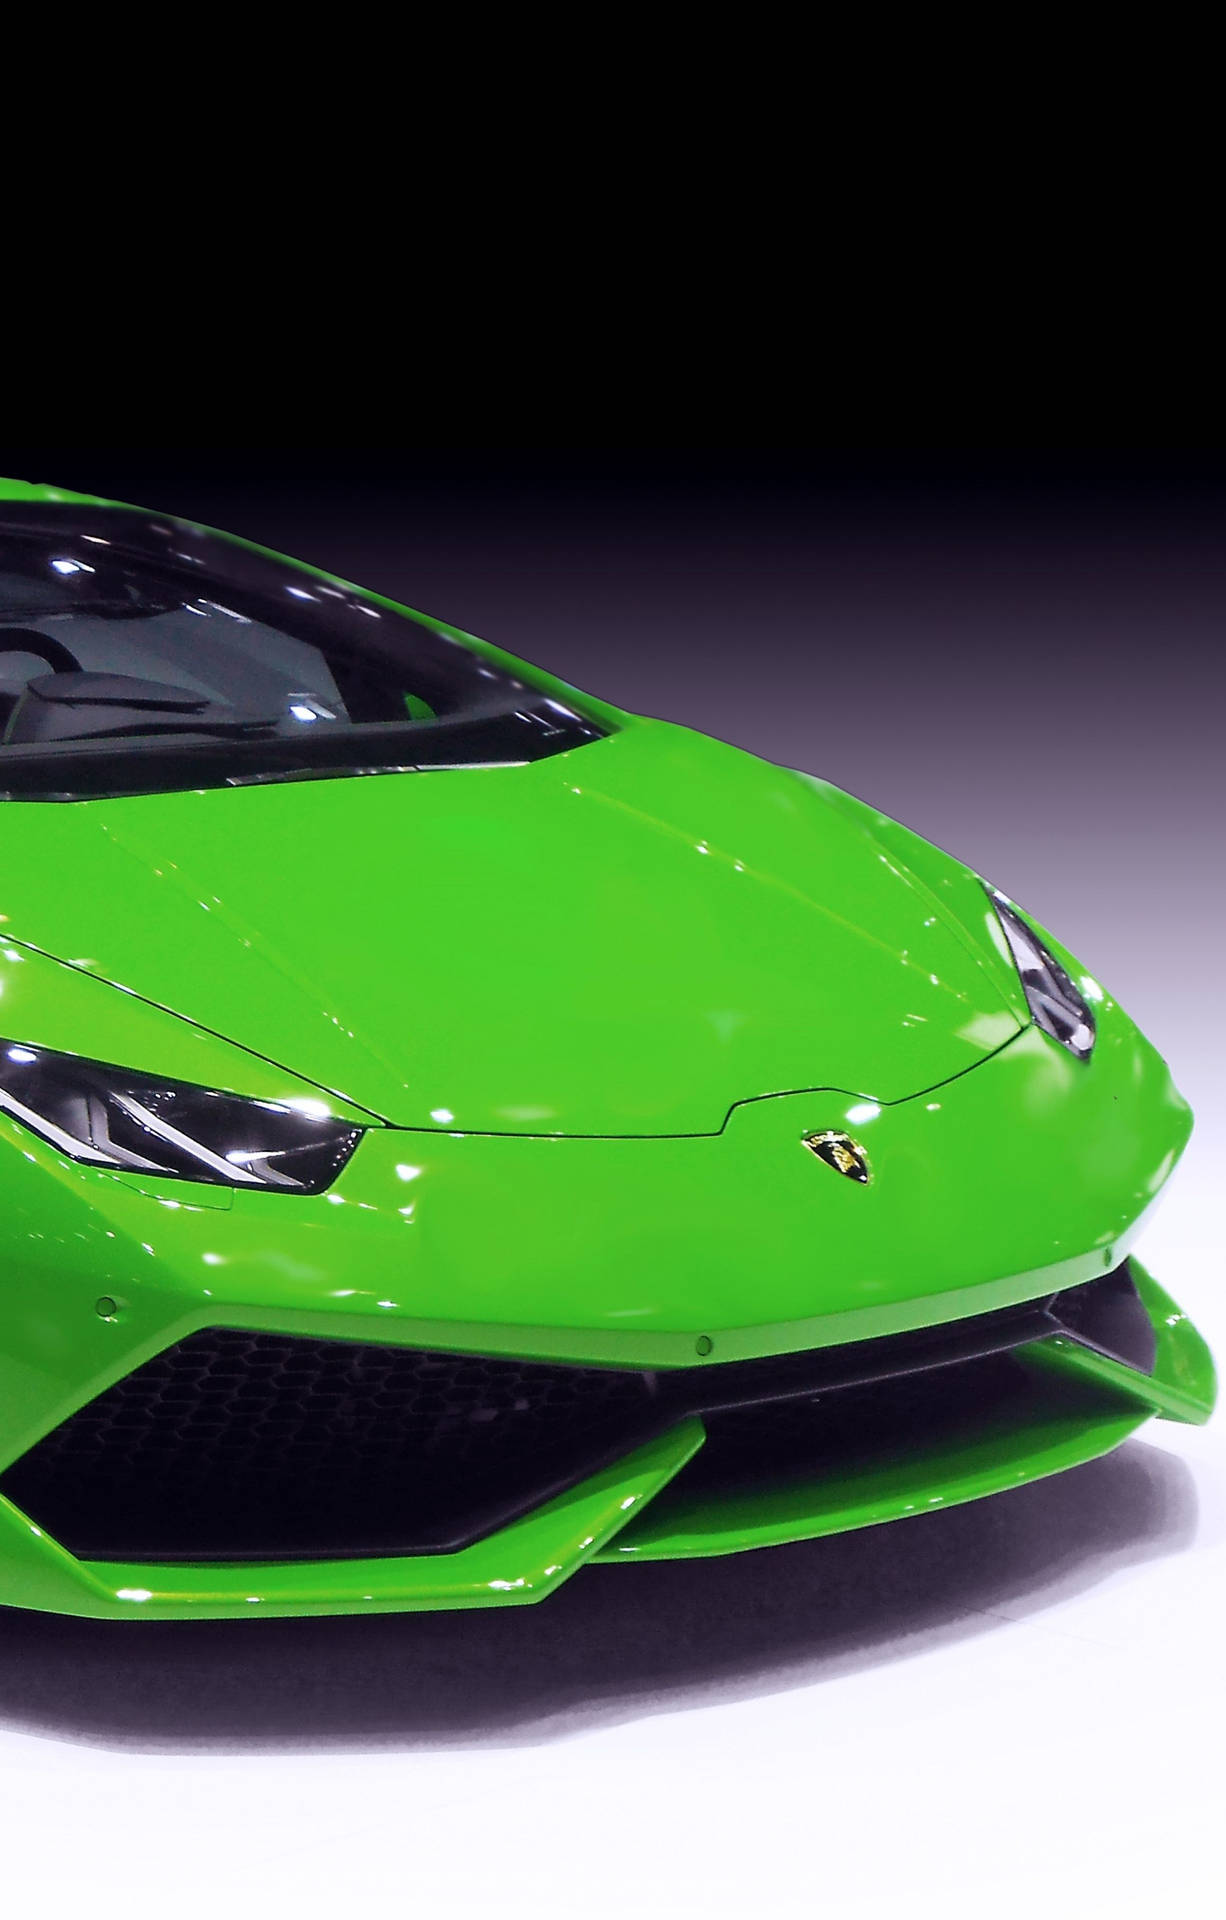 Feel the speed with this luxurious 4k Lamborghini Iphone Wallpaper